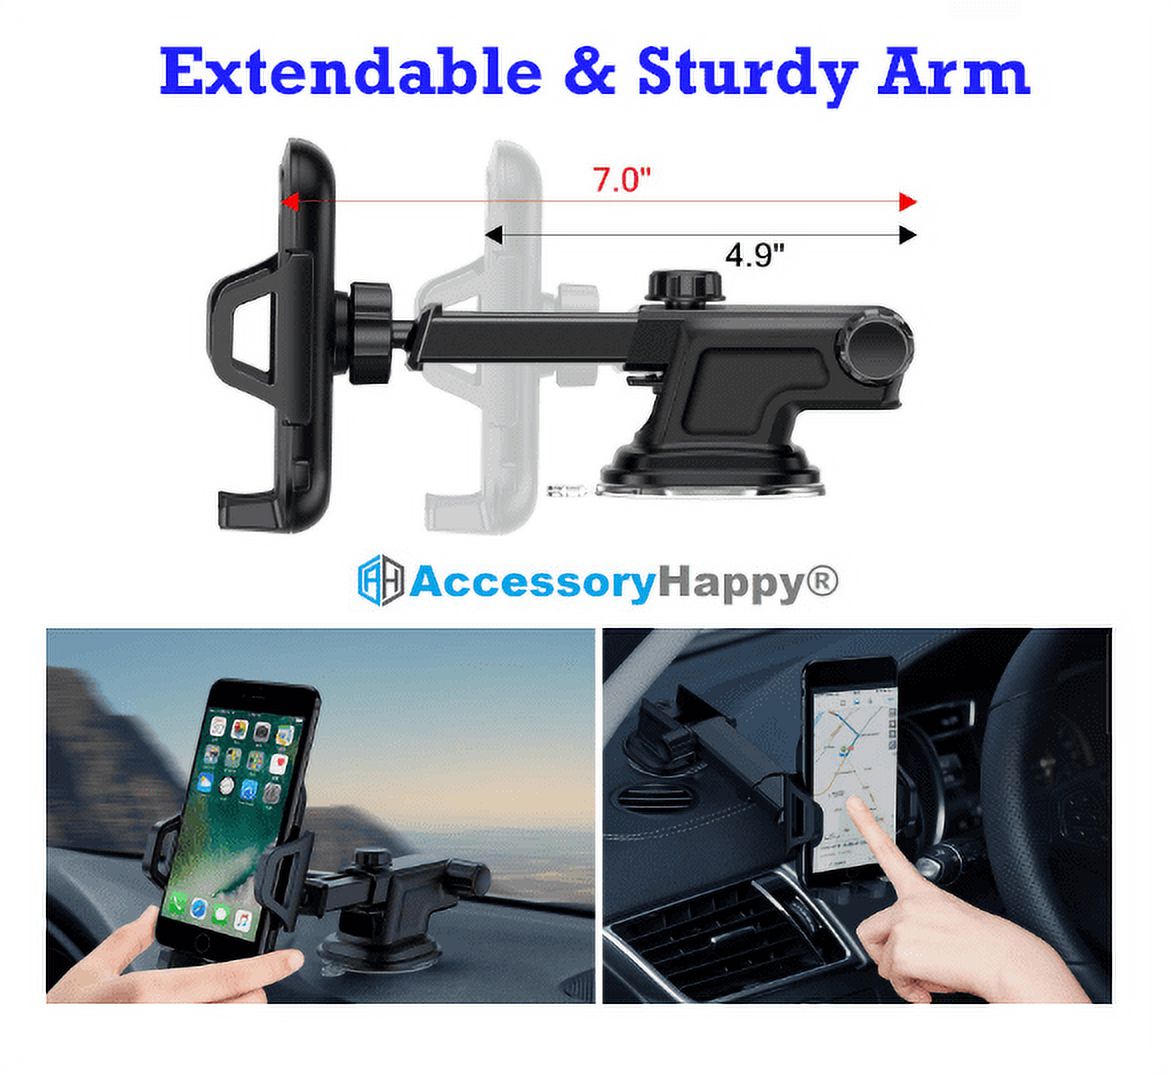 AccessoryHappy Dash Windshield Office Desk Phone Mount Universal Adjustable Multi-Angle Car Mount for Holder Stand Cell Phone iPhone Xs/XS Max/X/8/7 Plus/Galaxy - image 2 of 8